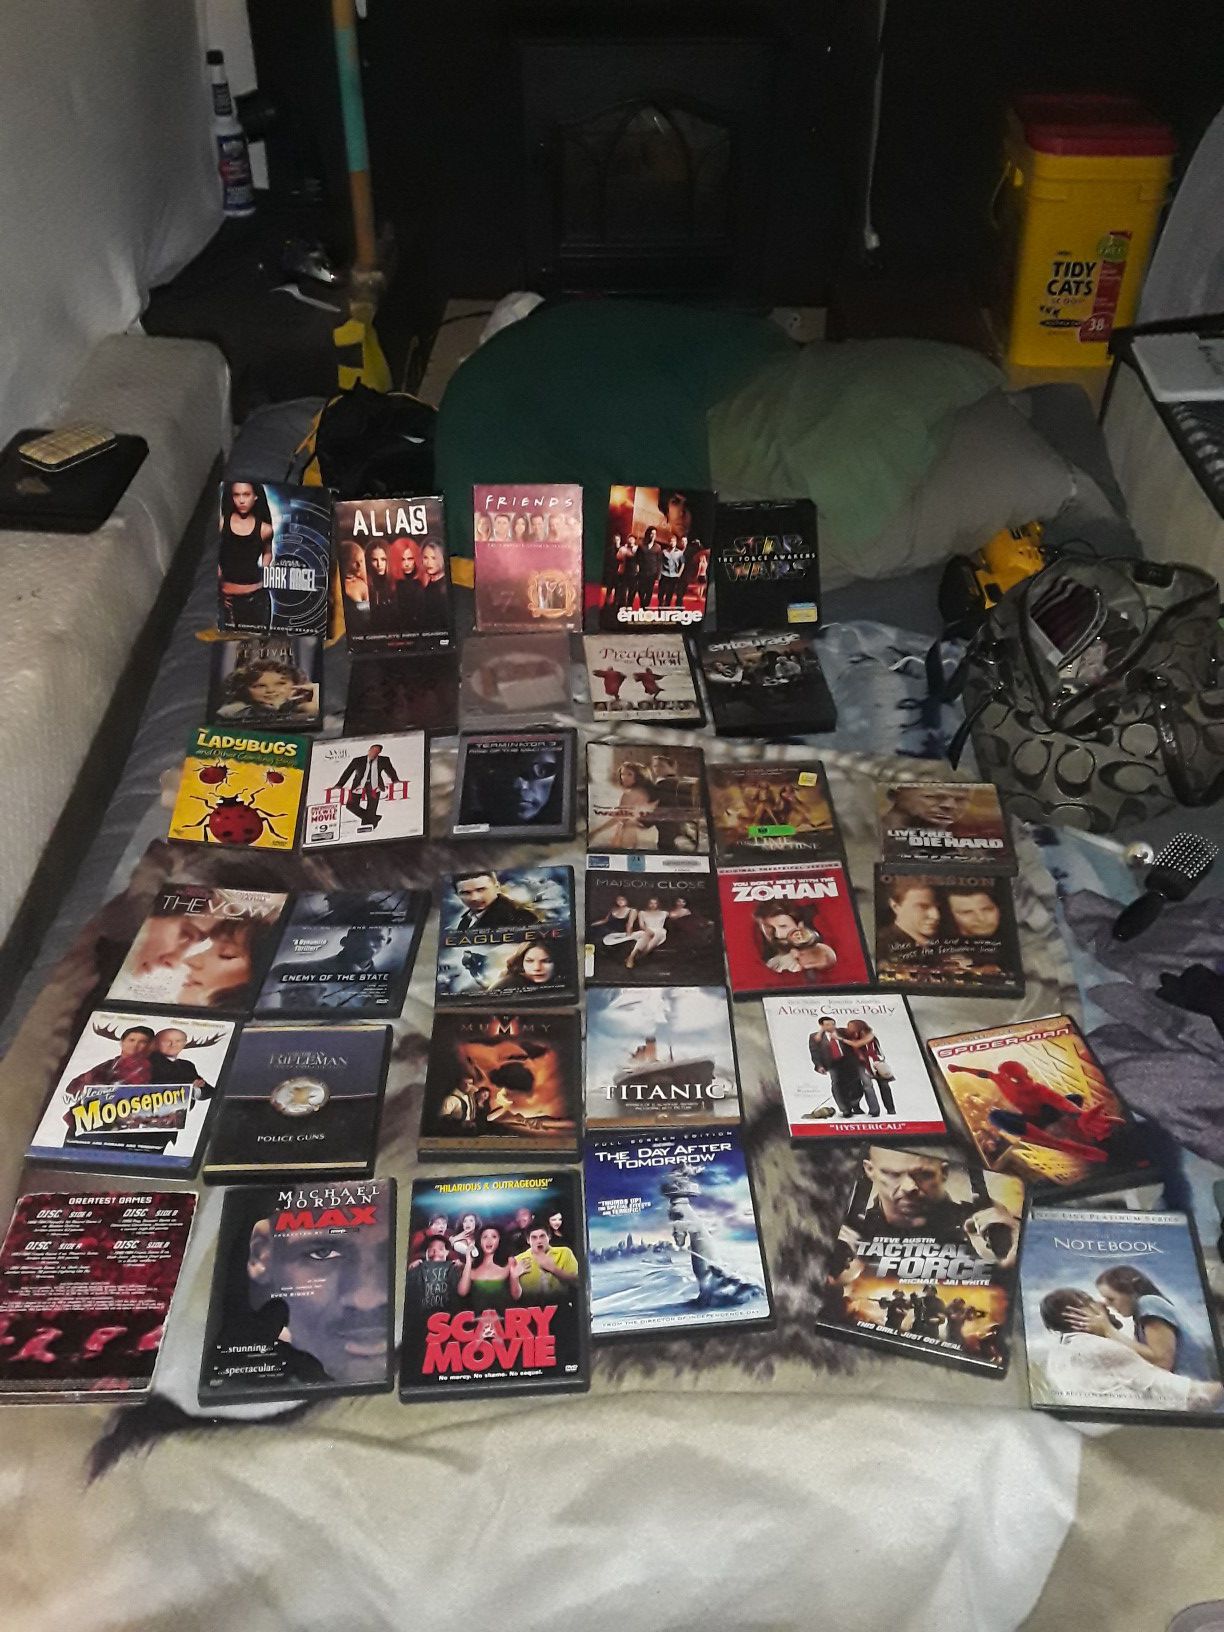 VARIETY OF GREAT MOVIES,THERE'S 33 MOVIES TOTAL...GREAT PACKAGE DEAL!!!